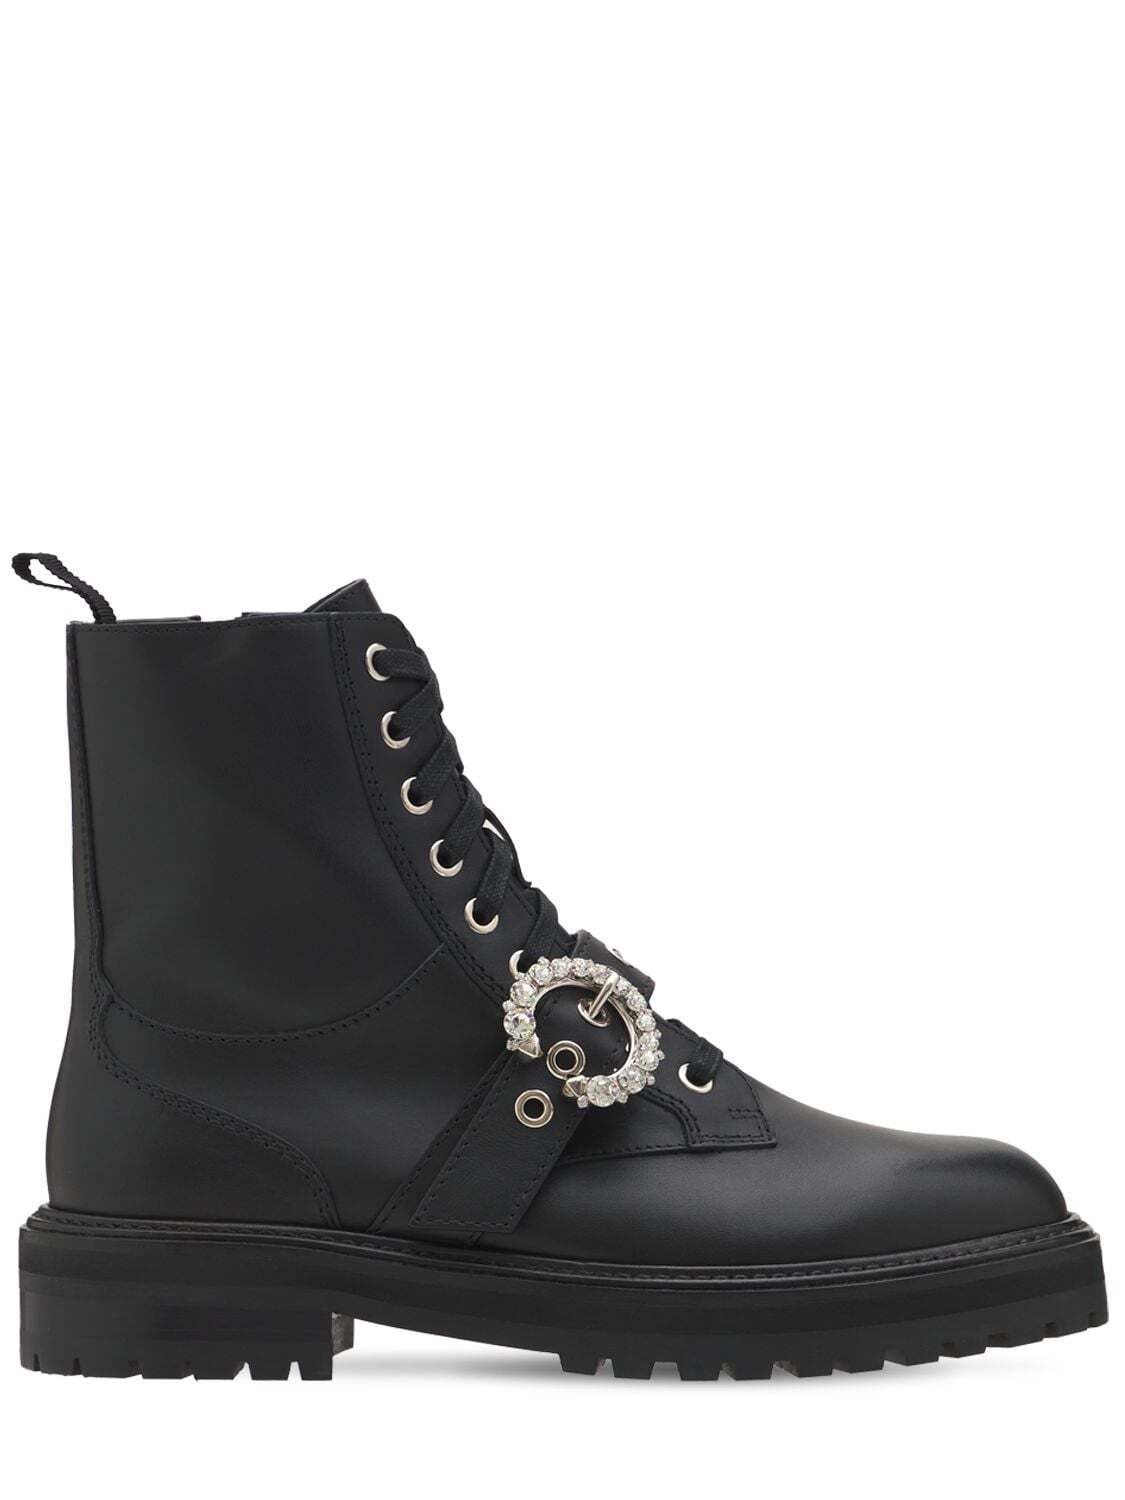 JIMMY CHOO 30mm Cora Leather Combat Boots in black